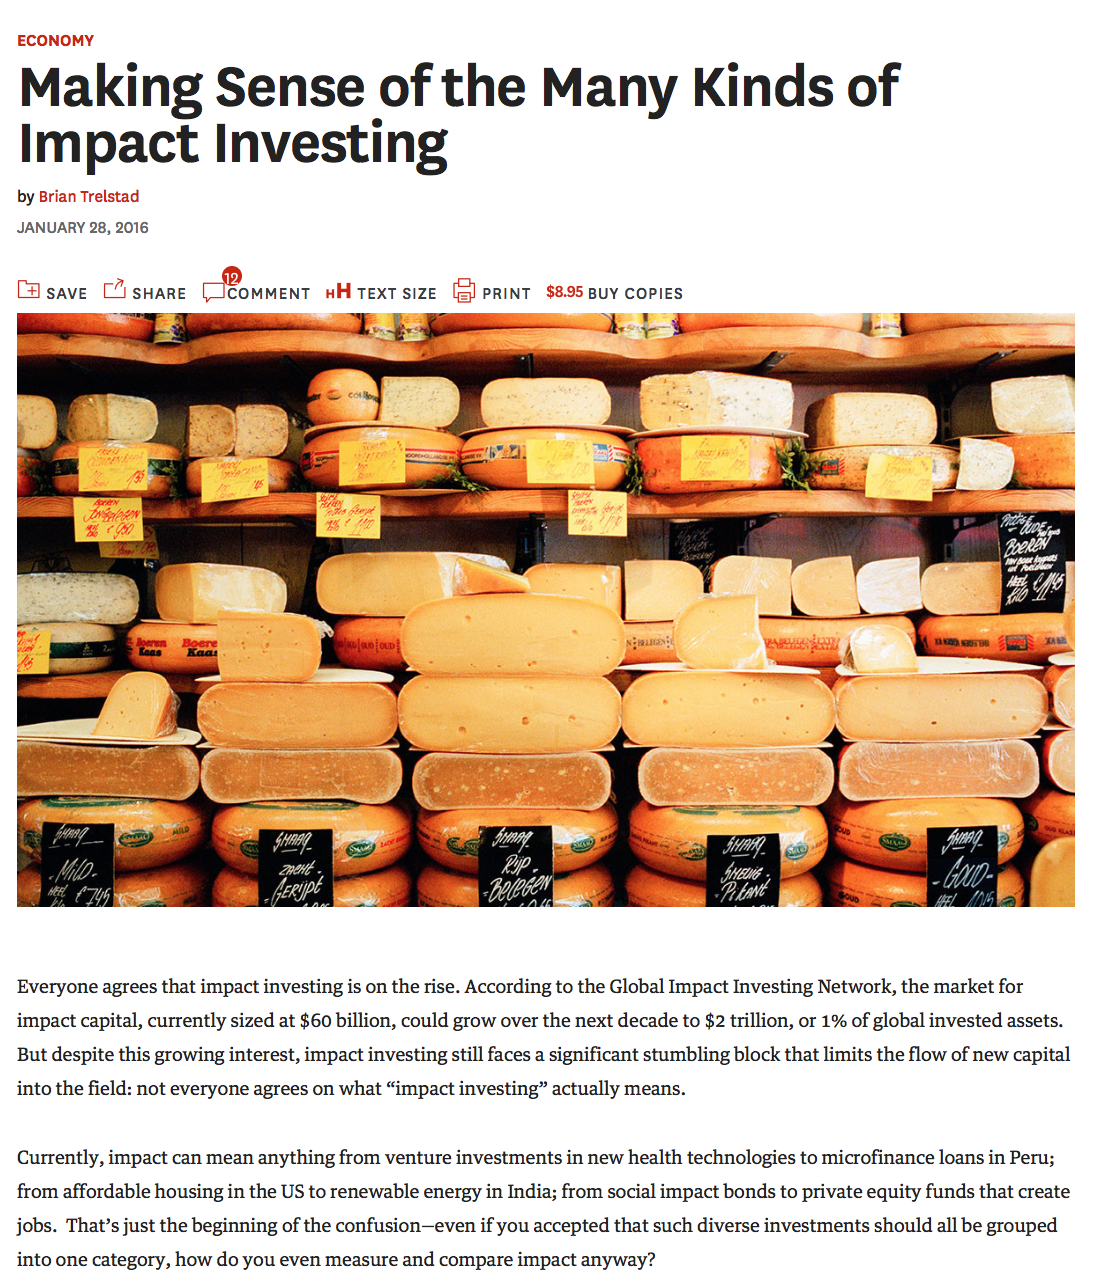 Making Sense of the Many Kinds of Impact Investing